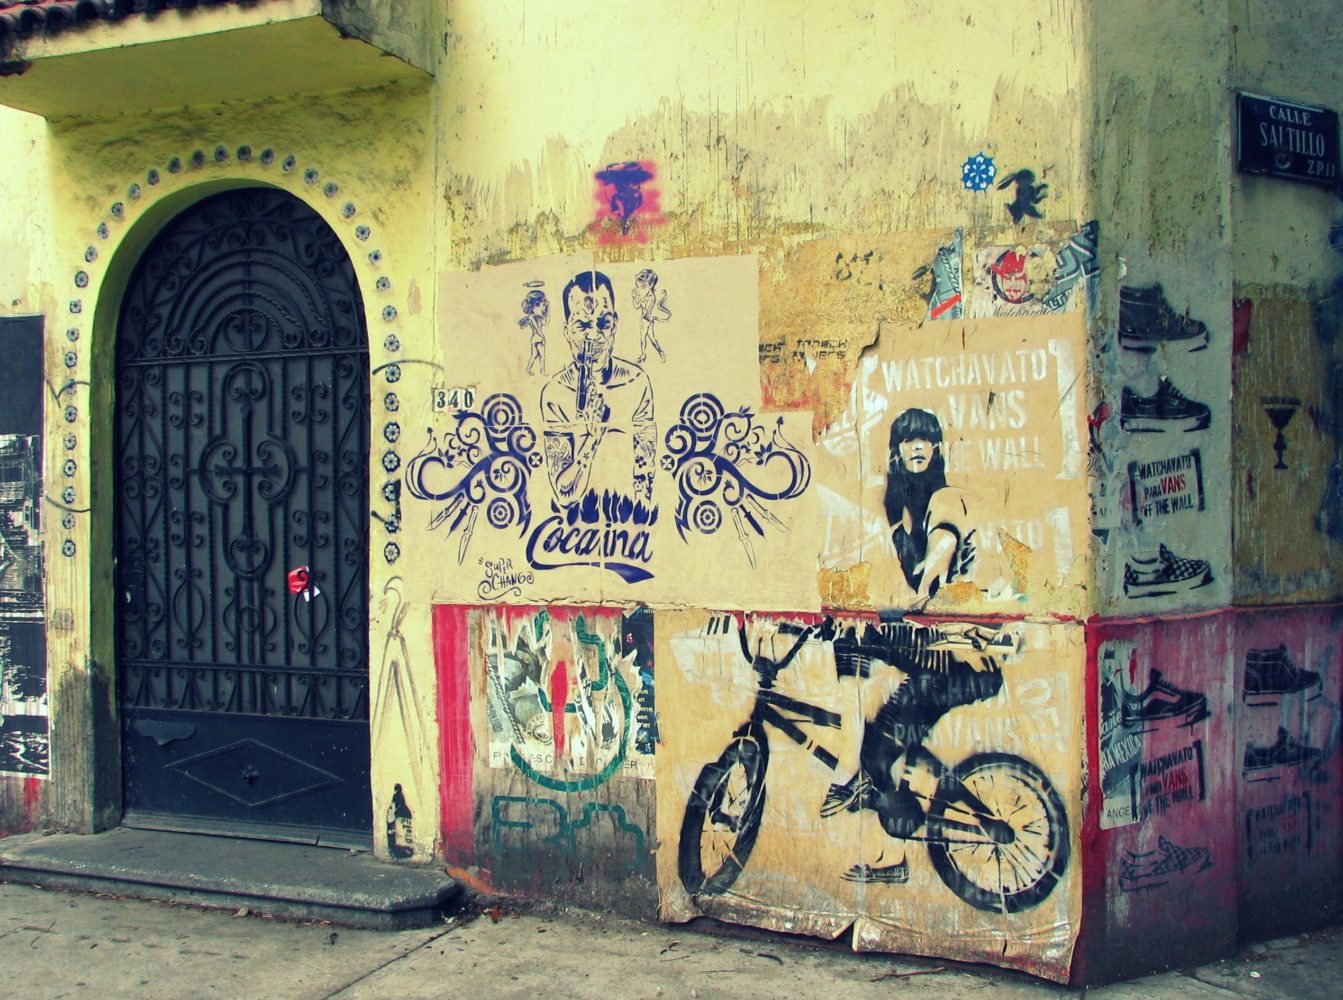 Graffiti on a yellow wall in Mexico City